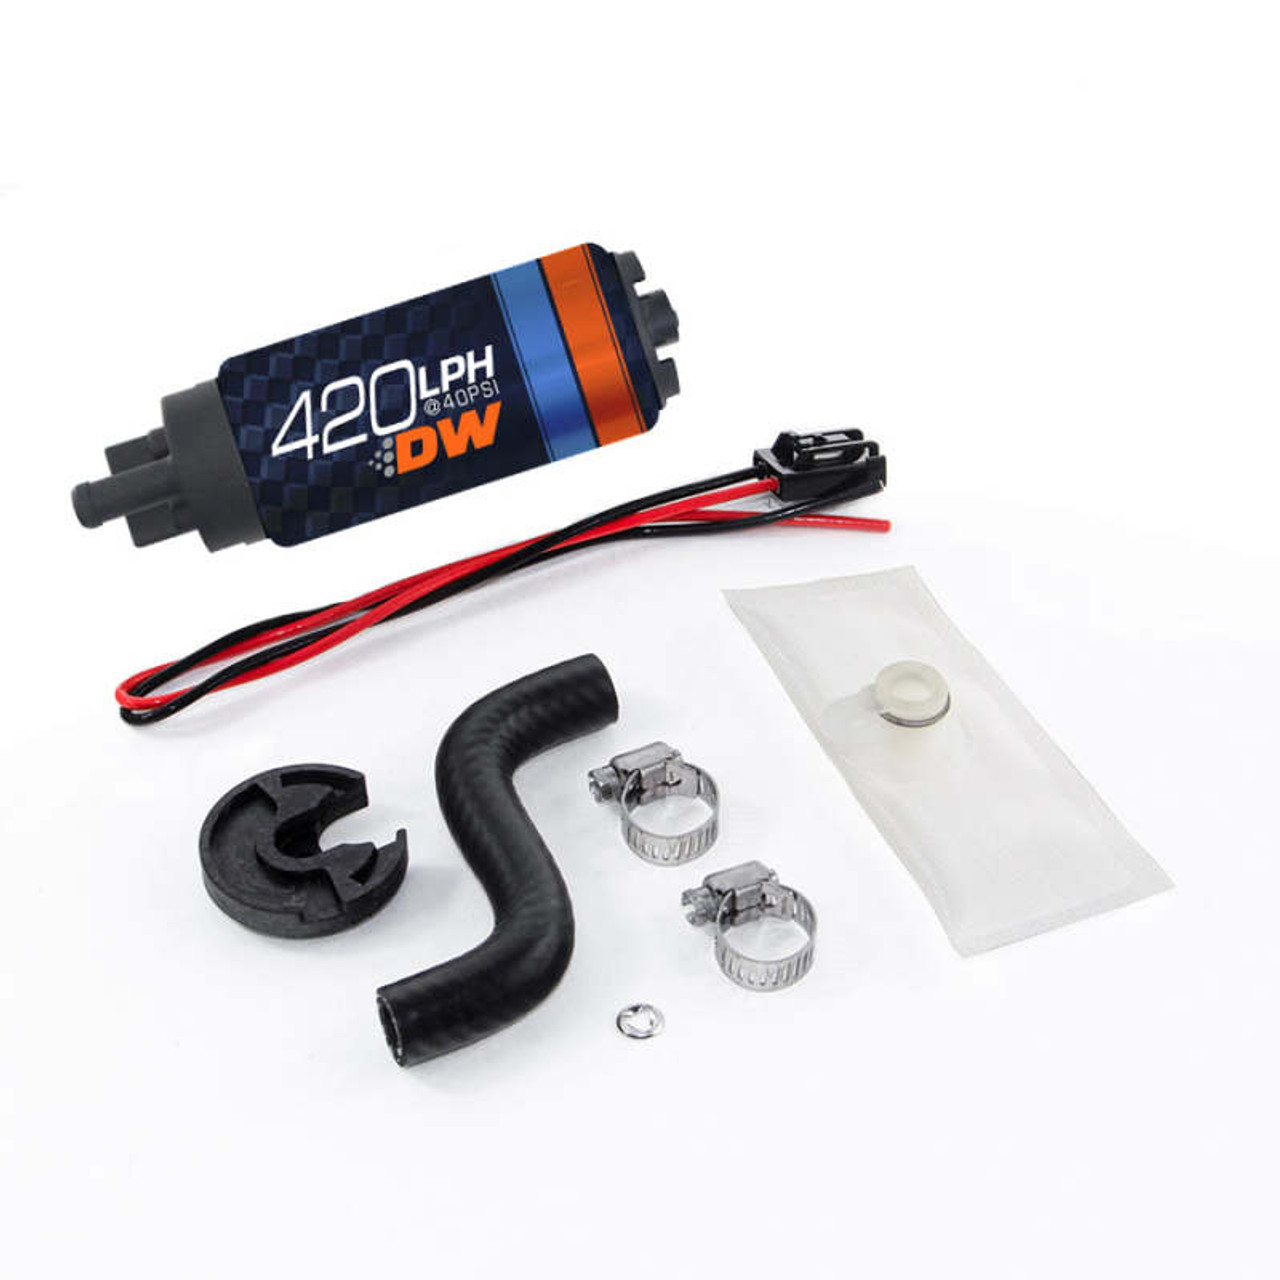 Deatschwerks DW420 Series 420lph In-Tank Fuel Pump w/ Install Kit For 85-97 Ford Mustang - 9-421-1014 Photo - Primary